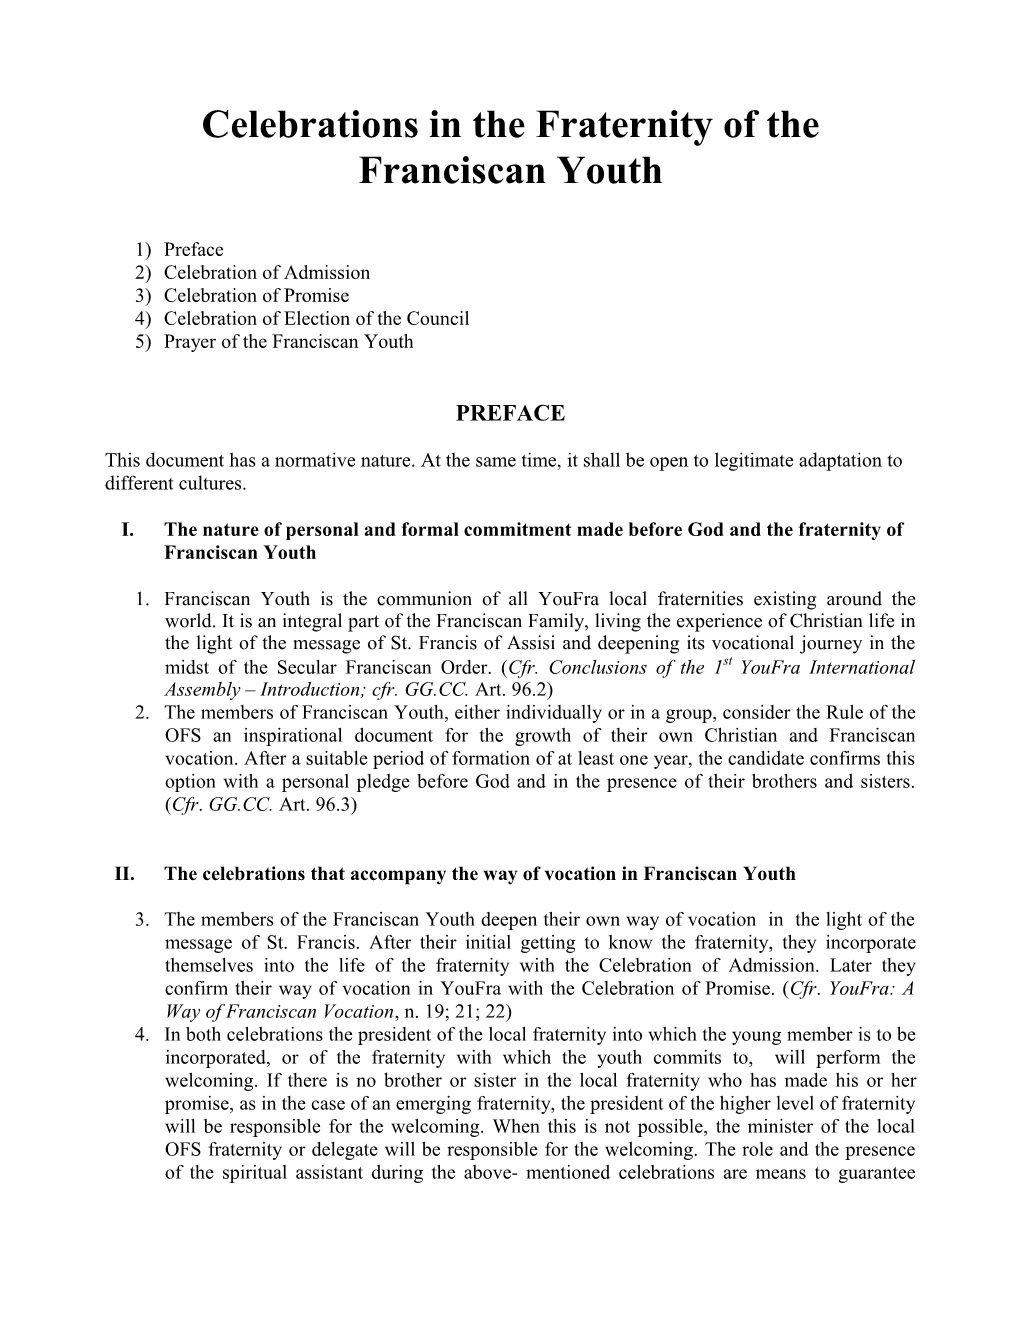 Celebrations in the Fraternity of the Franciscan Youth